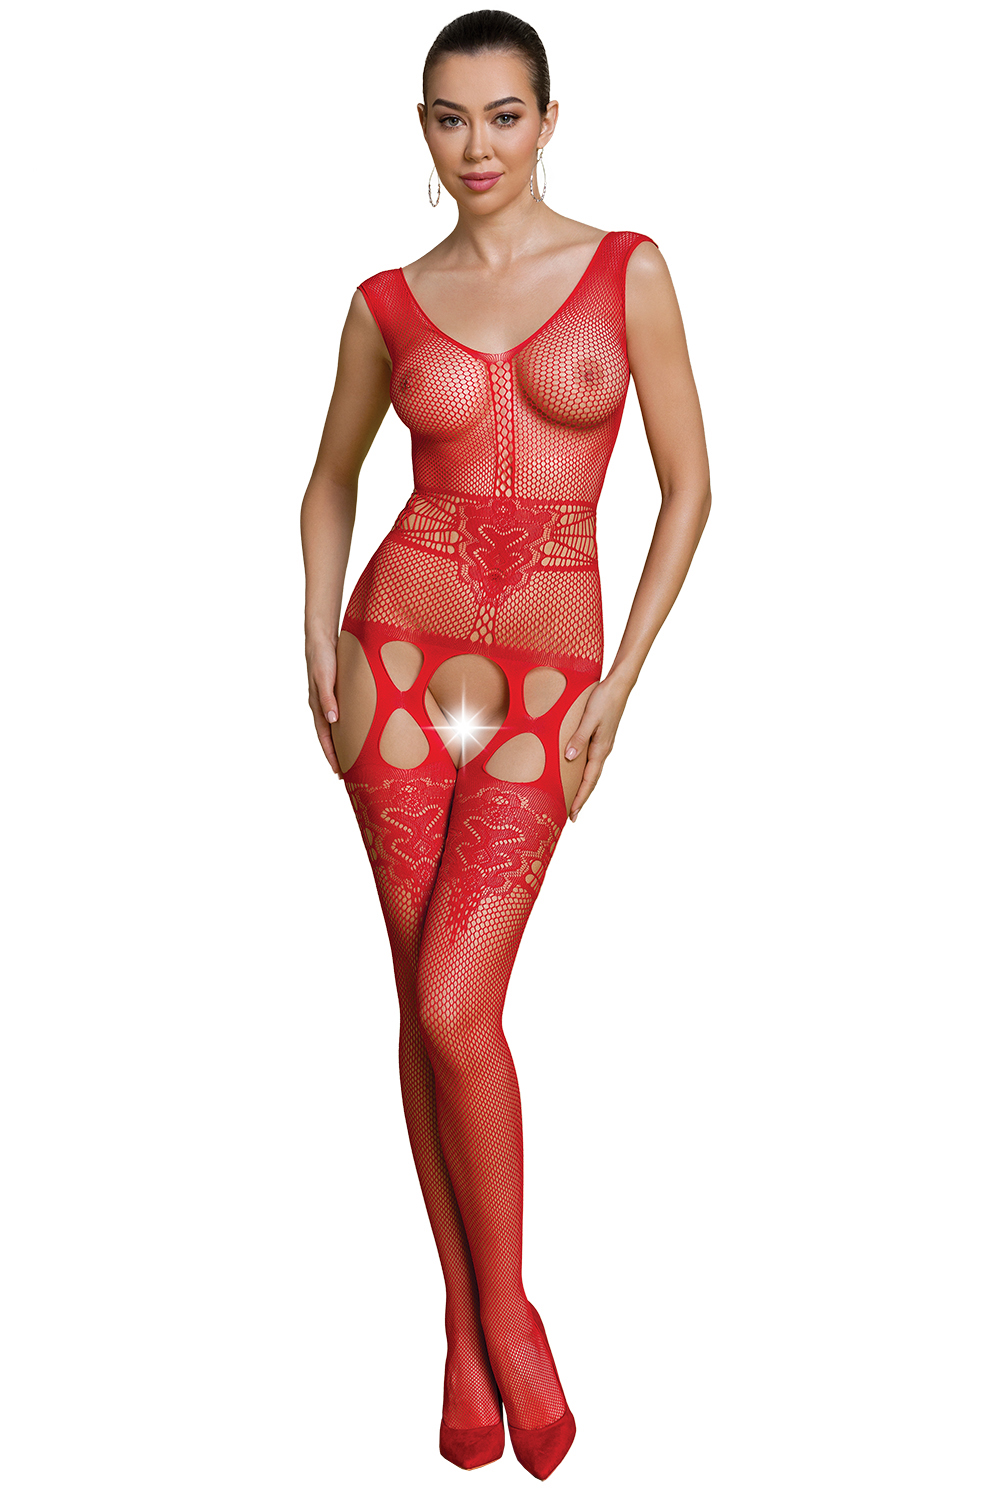 Passion ECO BS014 Body bodystocking, red